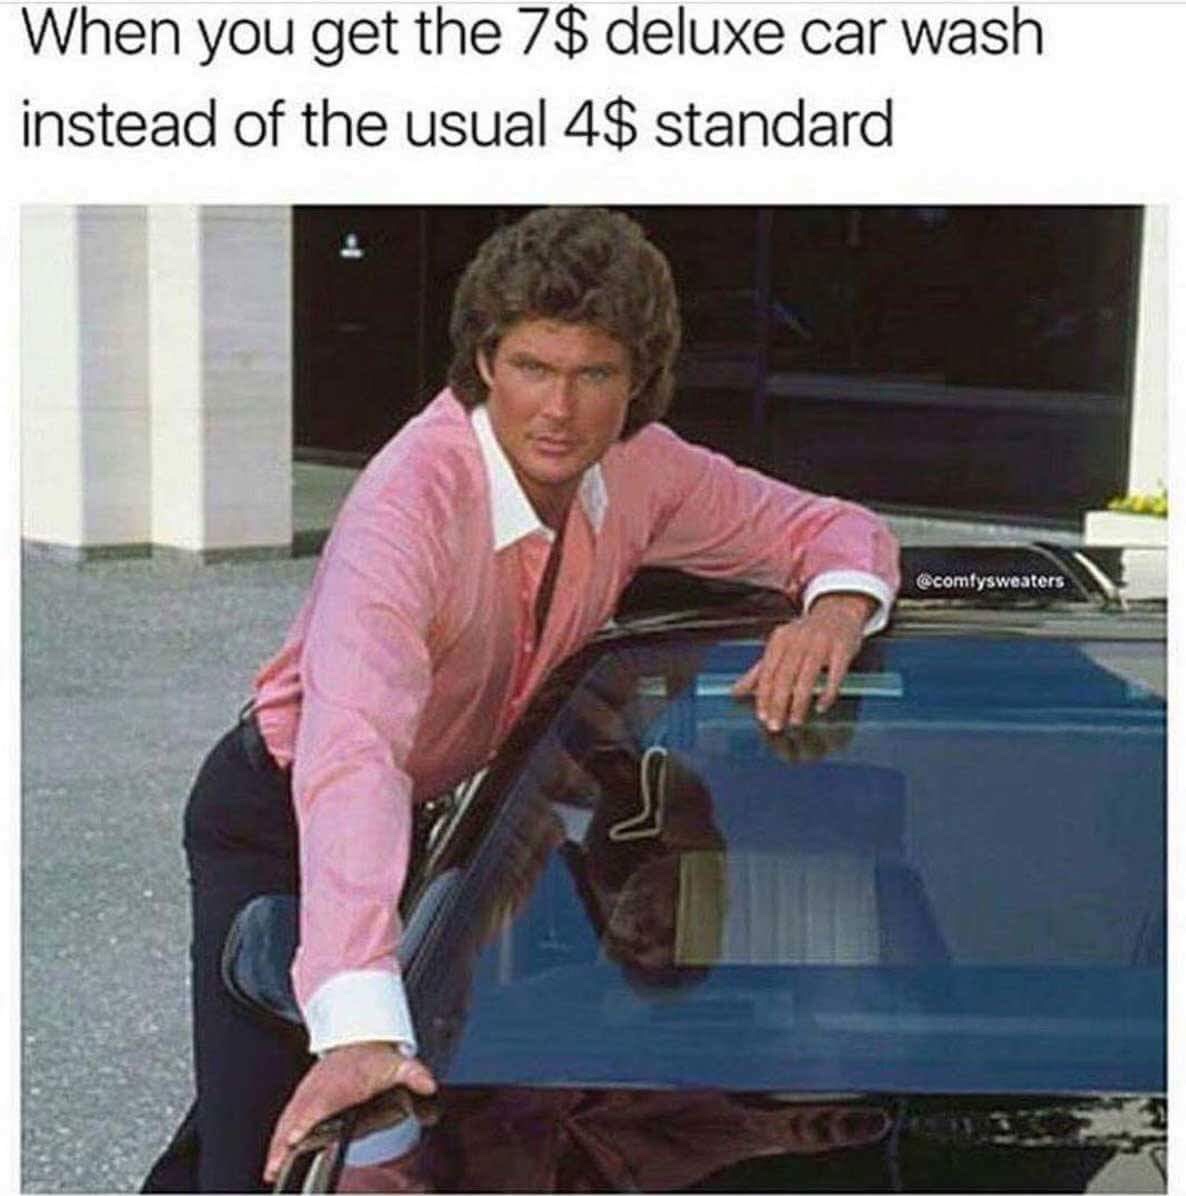 meme car wash meme - When you get the 7$ deluxe car wash instead of the usual 4$ standard comtysweaters